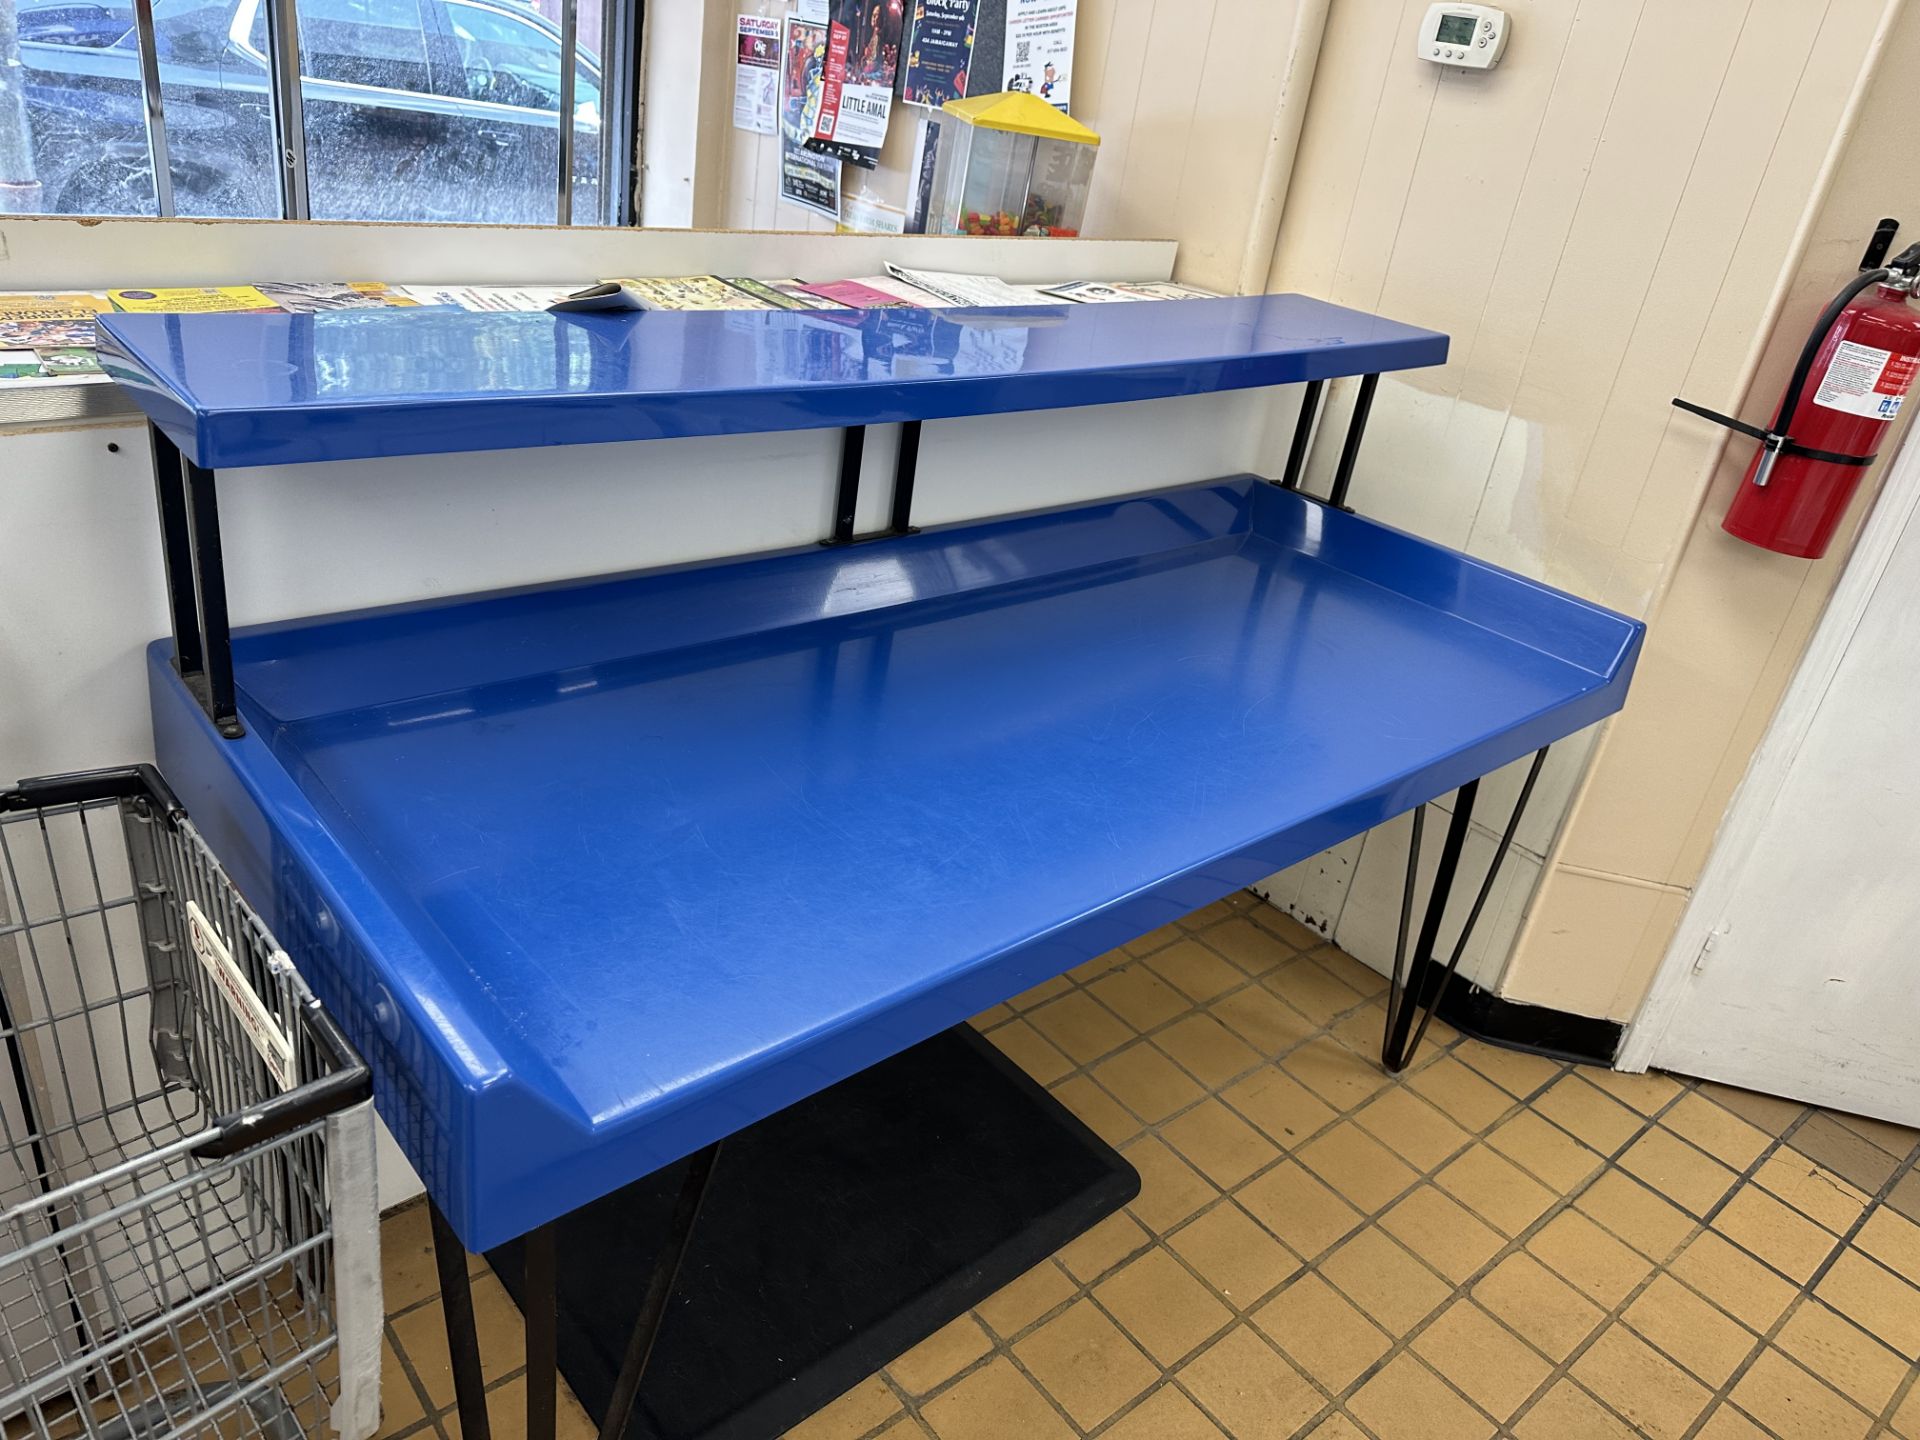 Approx. 6' x 30" 2 Tier Clothing Spread Table